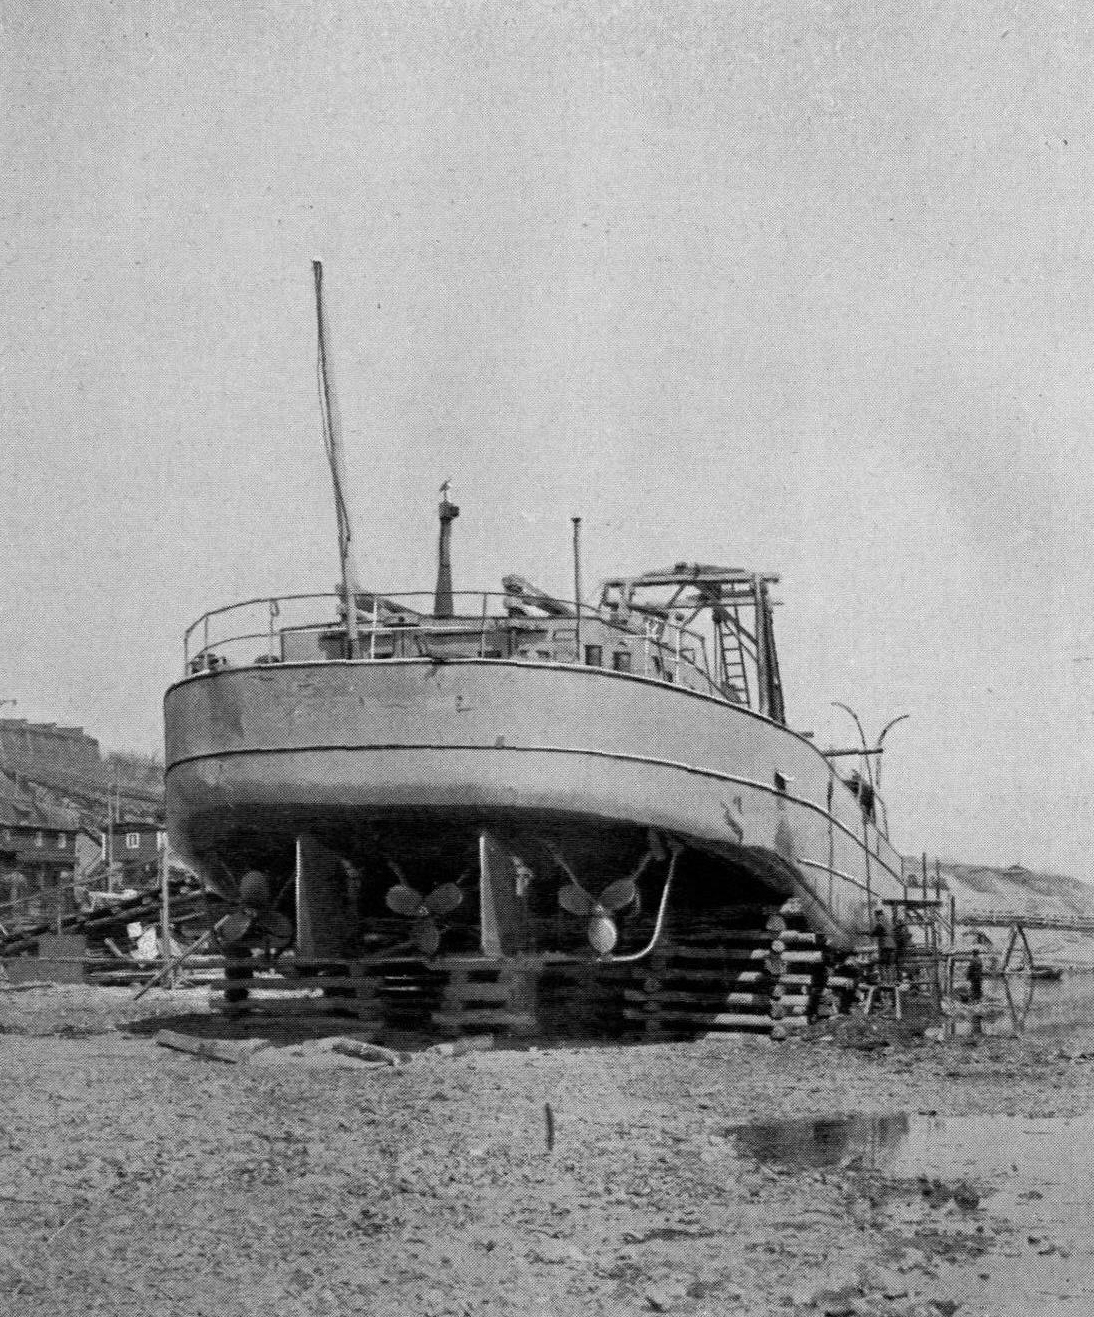 The river barge Vandal was together with its sister ship Sarmat the first diesel powered ships in 1903. They were strong enough to withstand harsh weather, as well as light enought to be able to pass through the sluices between Rybinsk and St Petersburg.